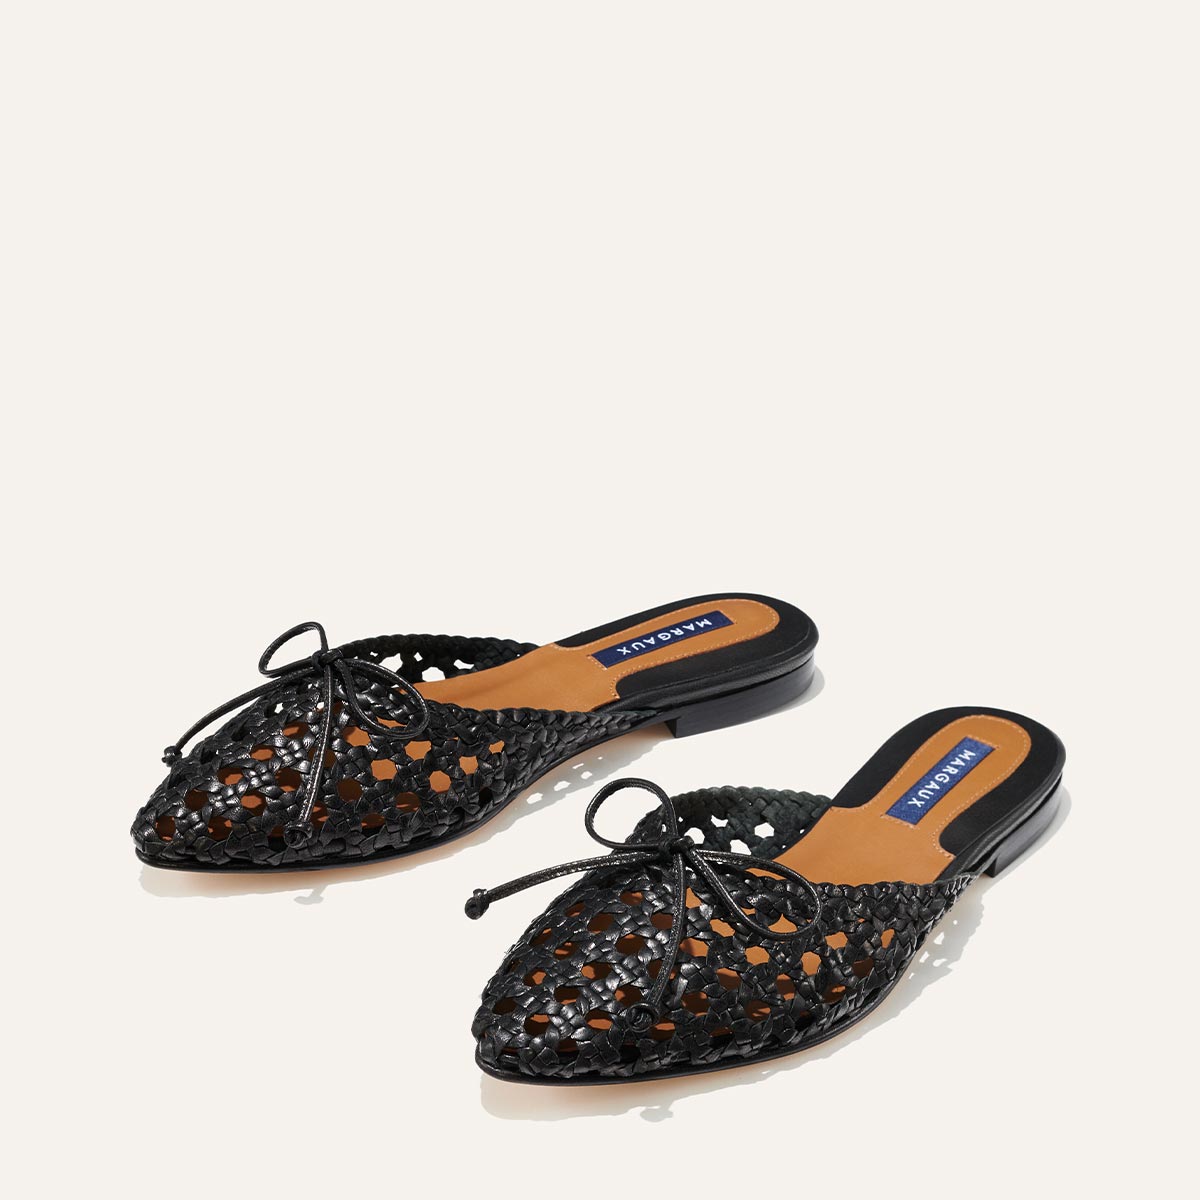 Margaux's classic and comfortable Ballet Mule, handwoven in India from soft black leather and finished in Spain